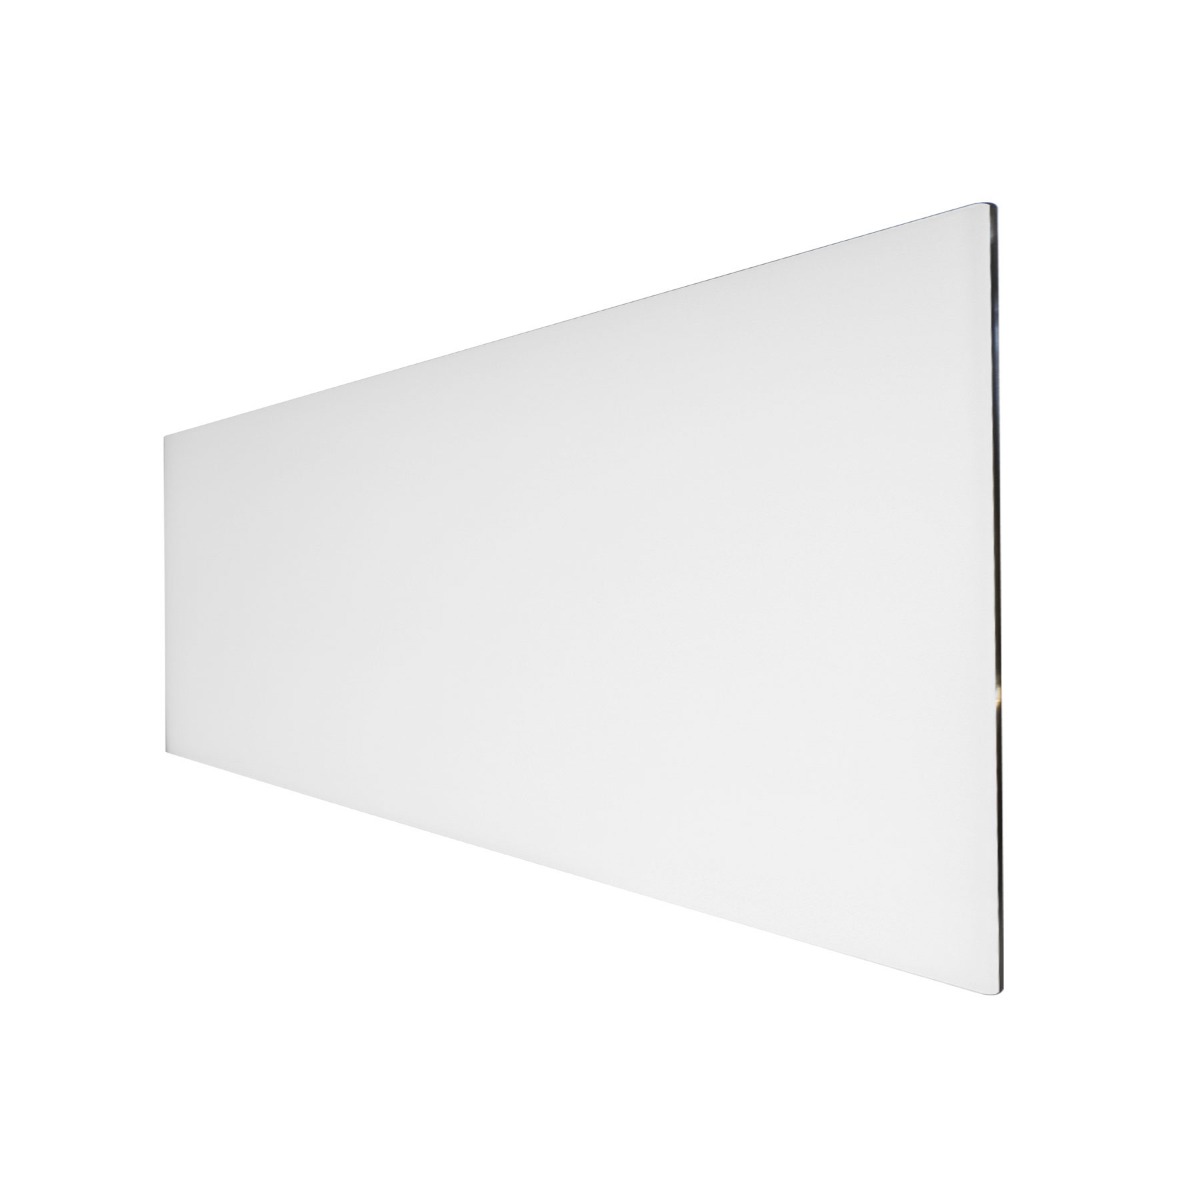 Technotherm ISP Design Glass Infrared Heating Panel - White 950w (1630 x 690mm)